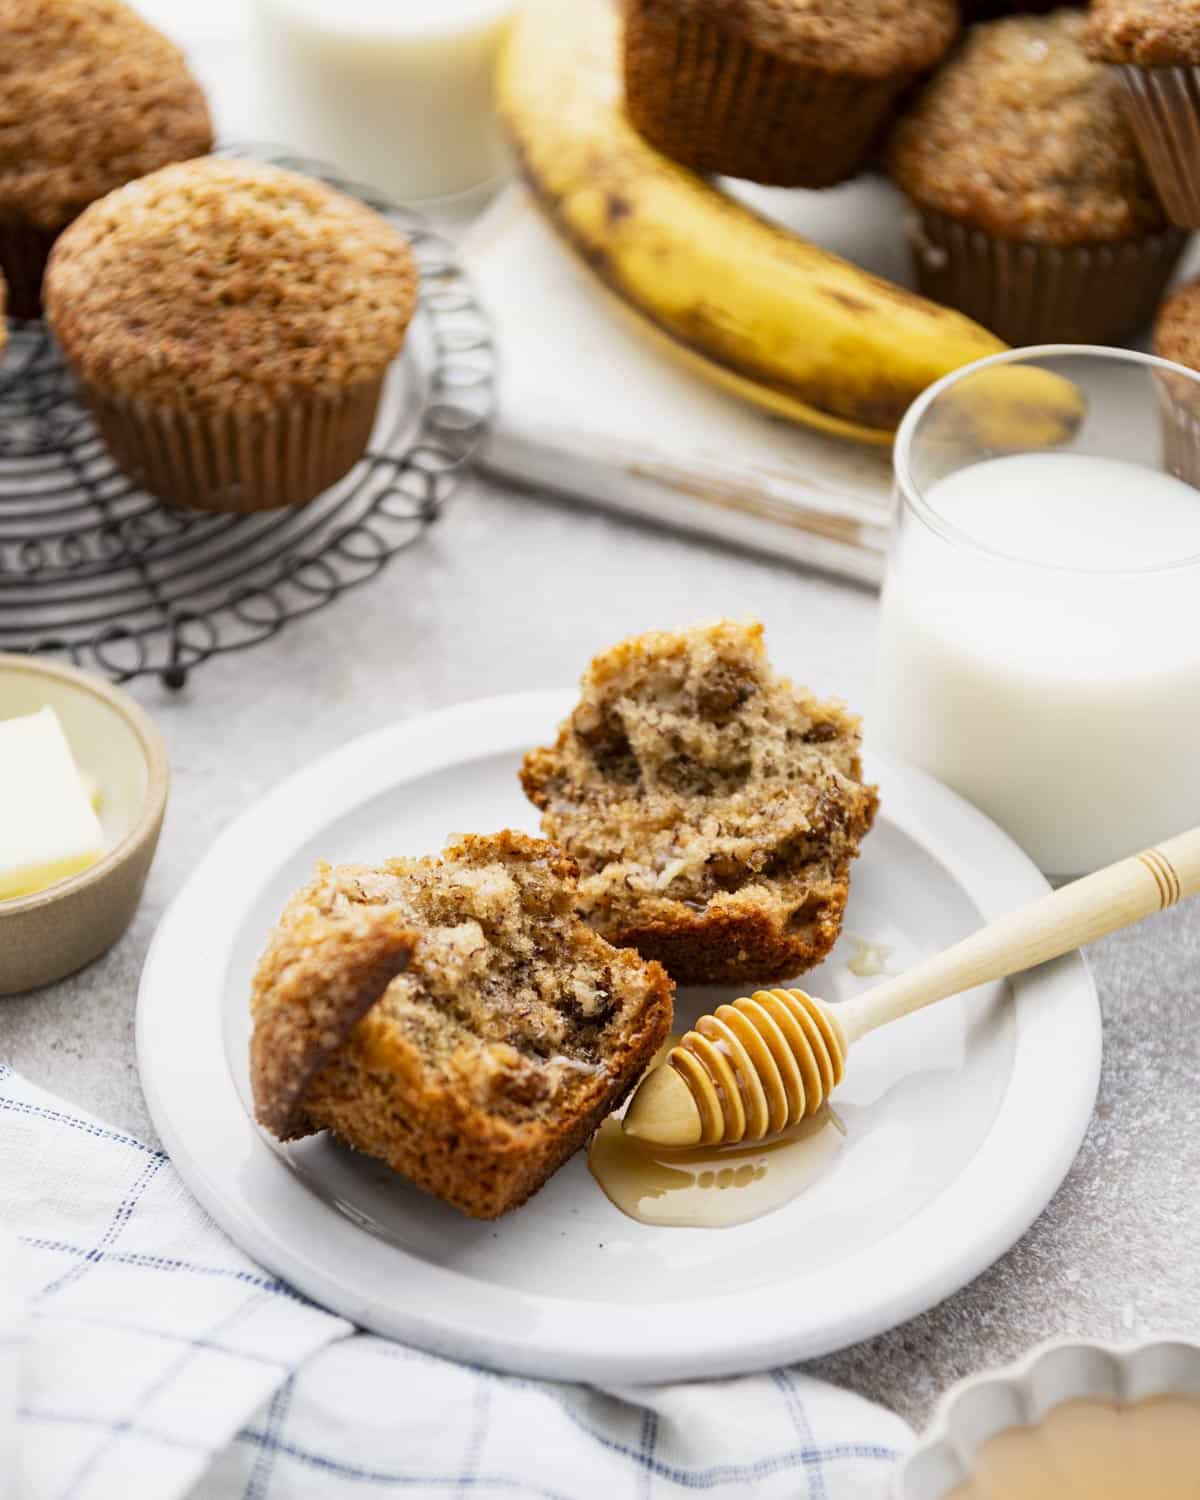 The best banana nut muffin recipe served on a white plate with a glass of milk.